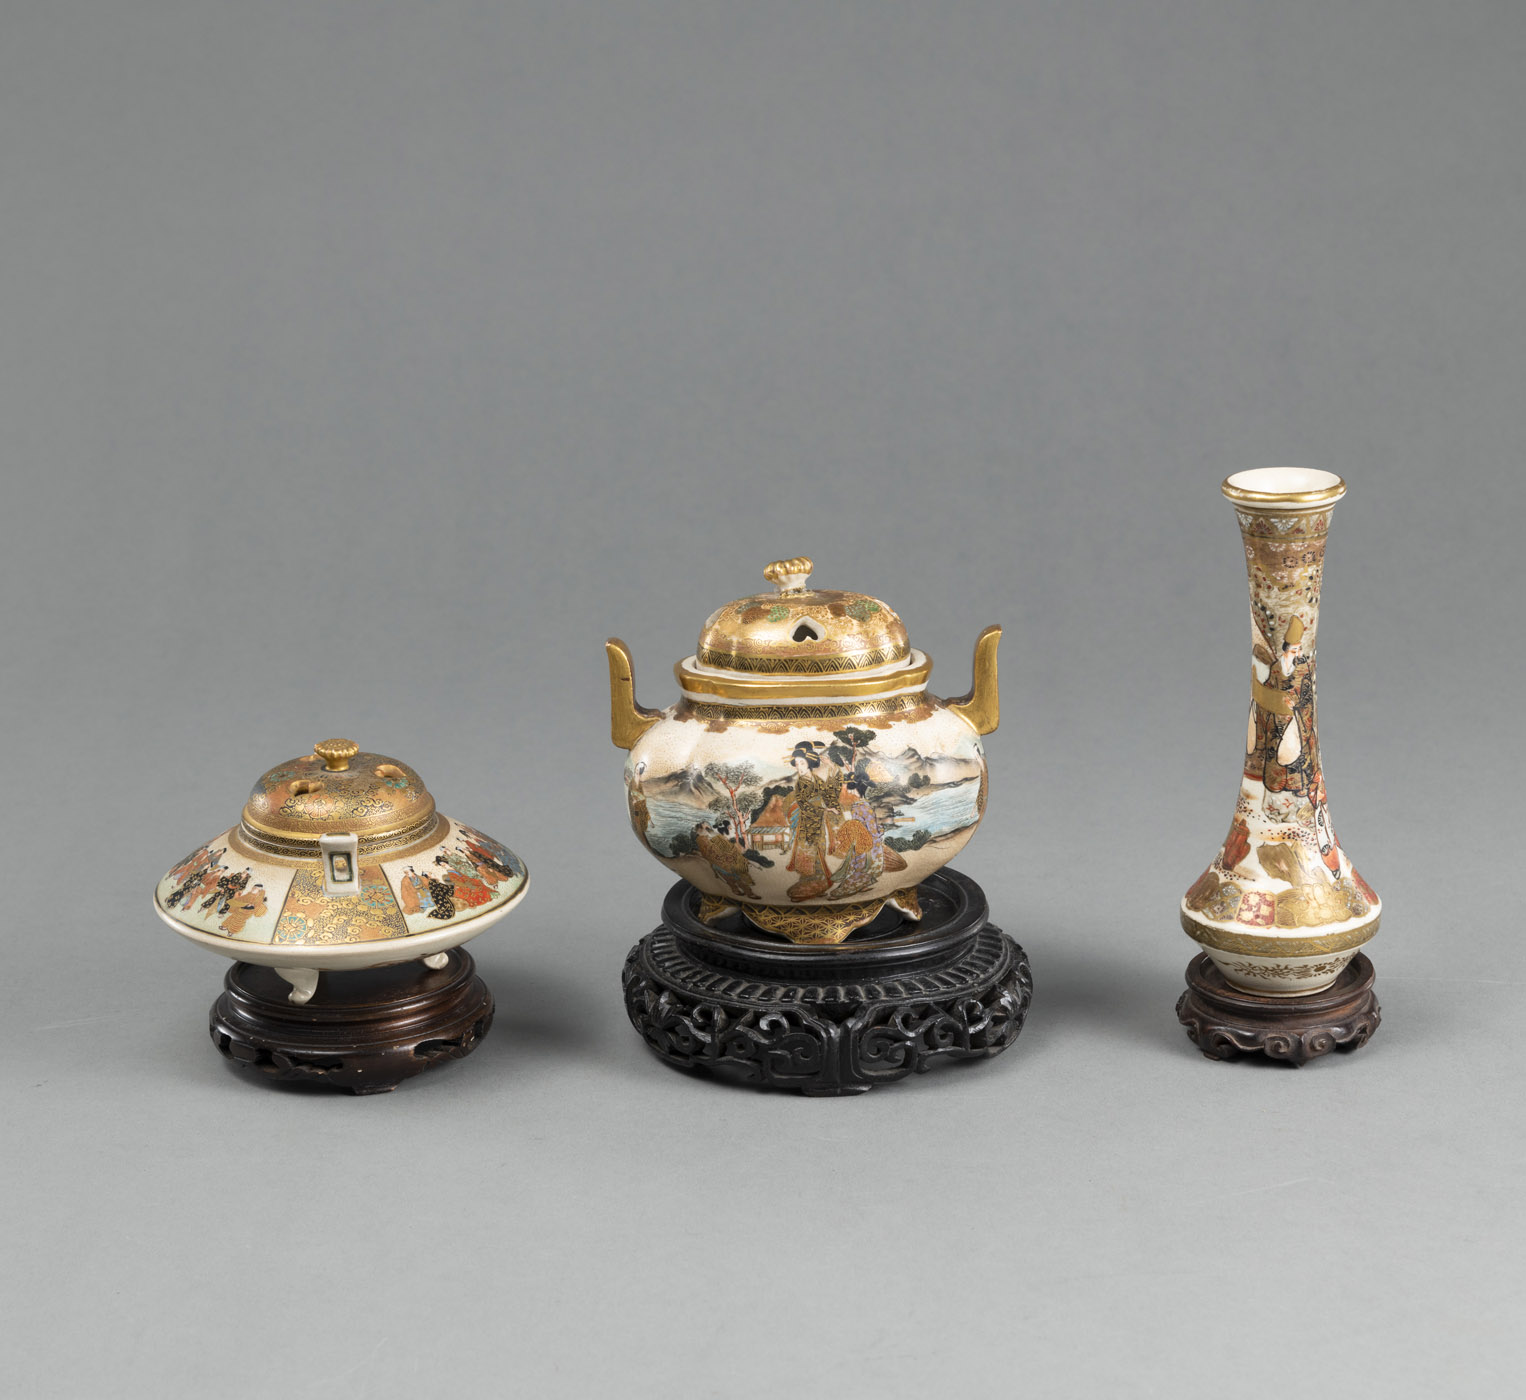 <b>TWO SATSUMA STONEWARE KORO (INCENSE BURNER) WITH OPENWORK COVERS AND A SMALL VASE, ALL WITH FIGURAL DECORATION, EACH WITH A WOODEN BASE</b>